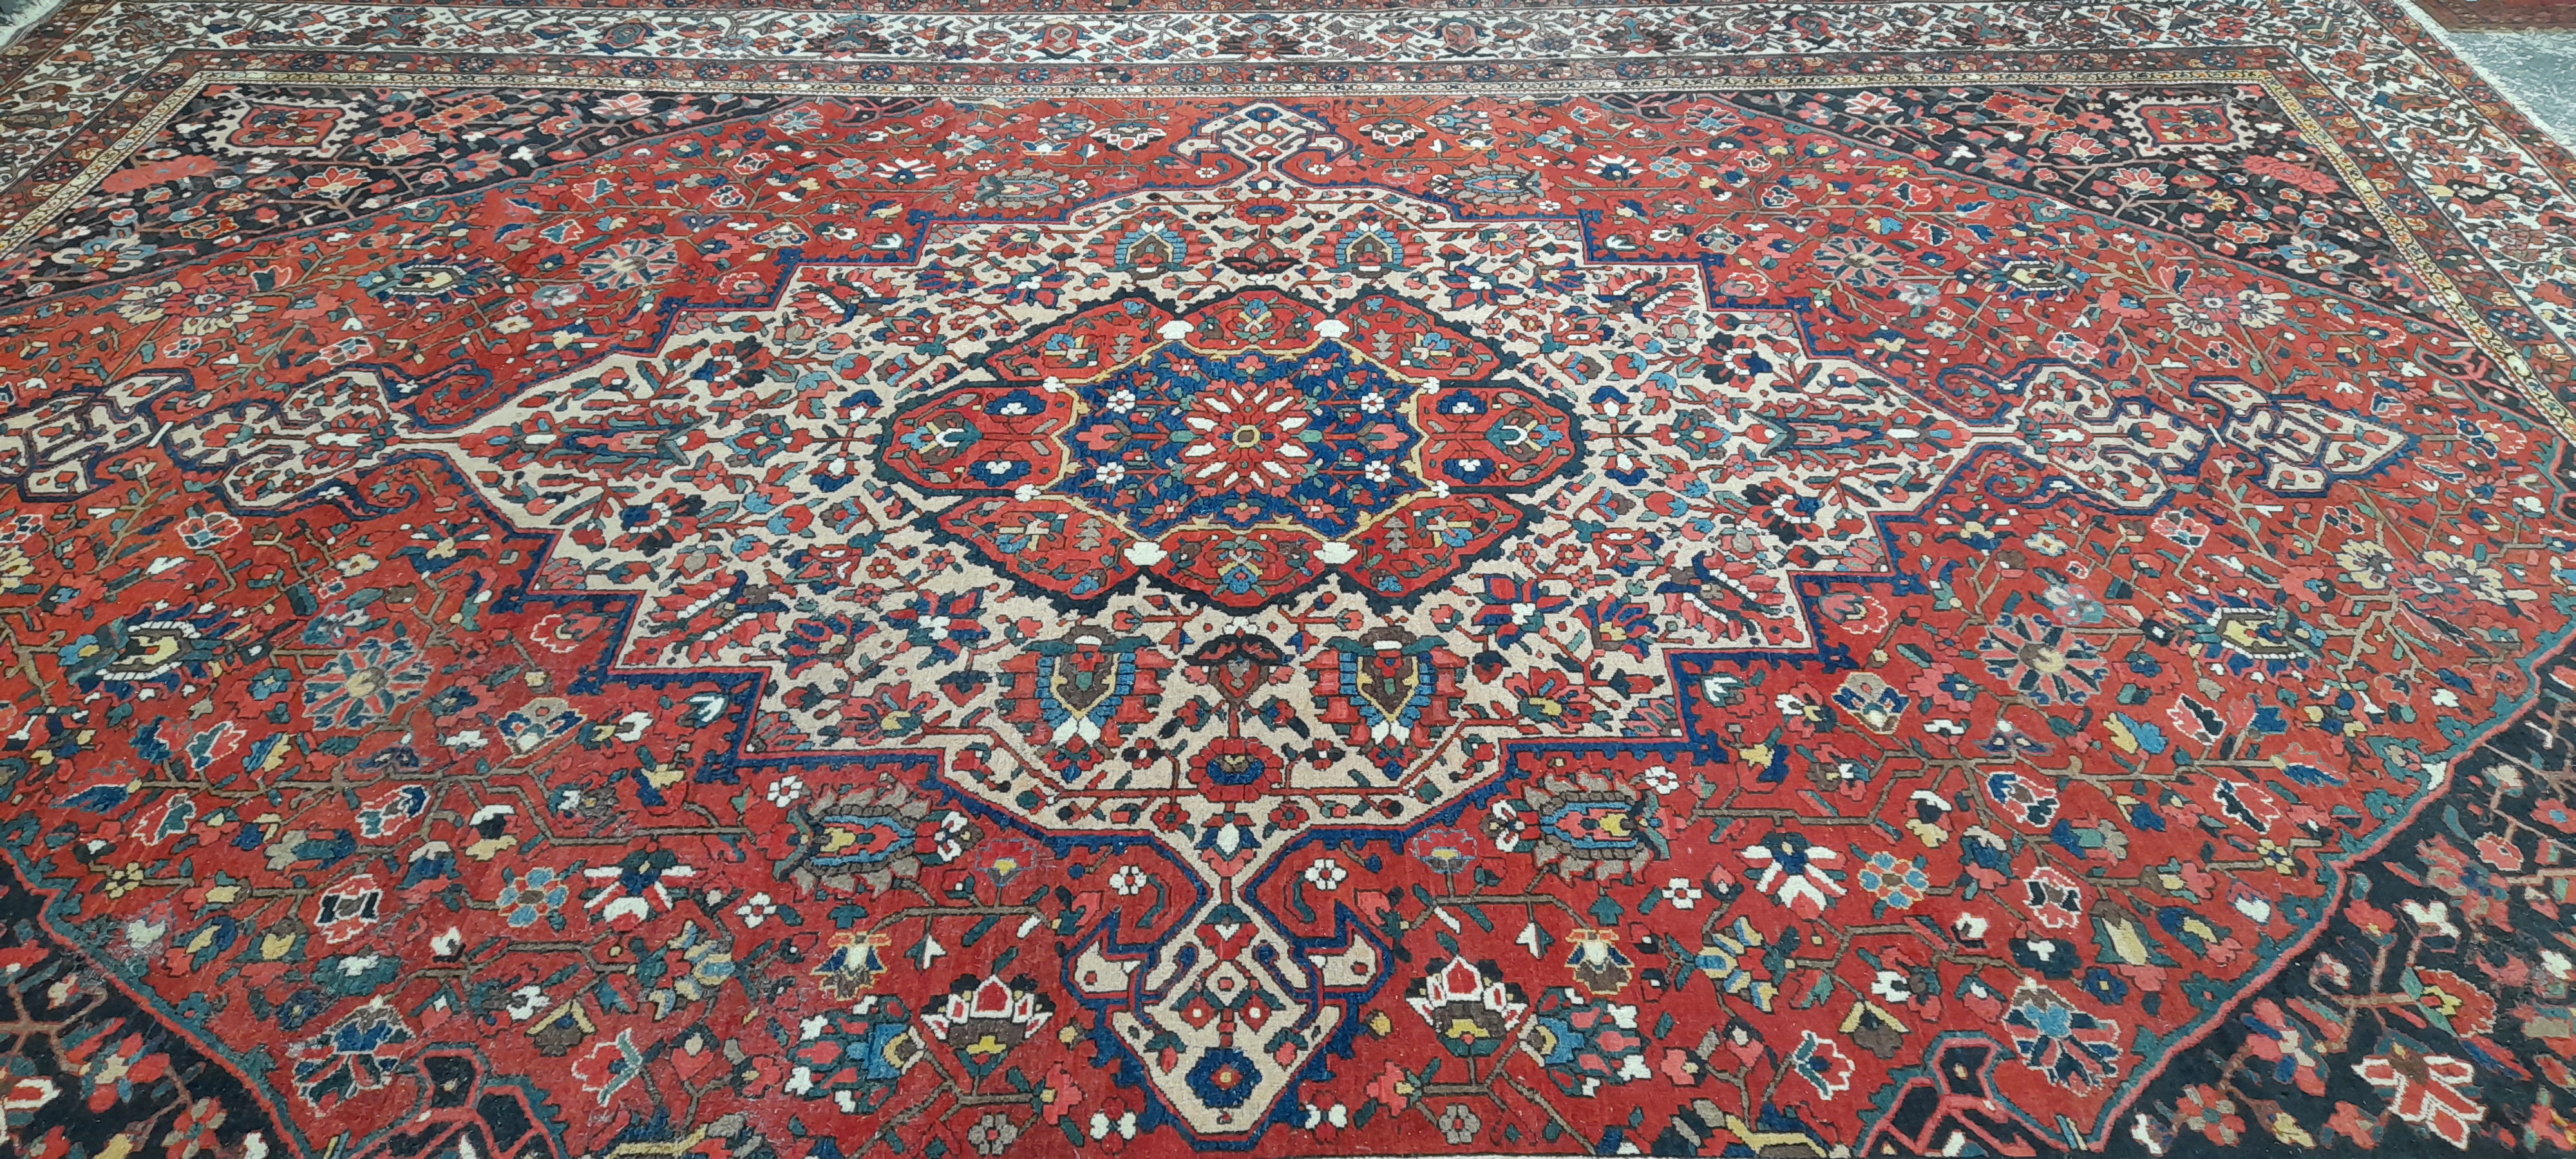 A COUNTRY HOUSE PERSIAN BAHKTIARI CARPET. 560 x 396cms - Image 2 of 8